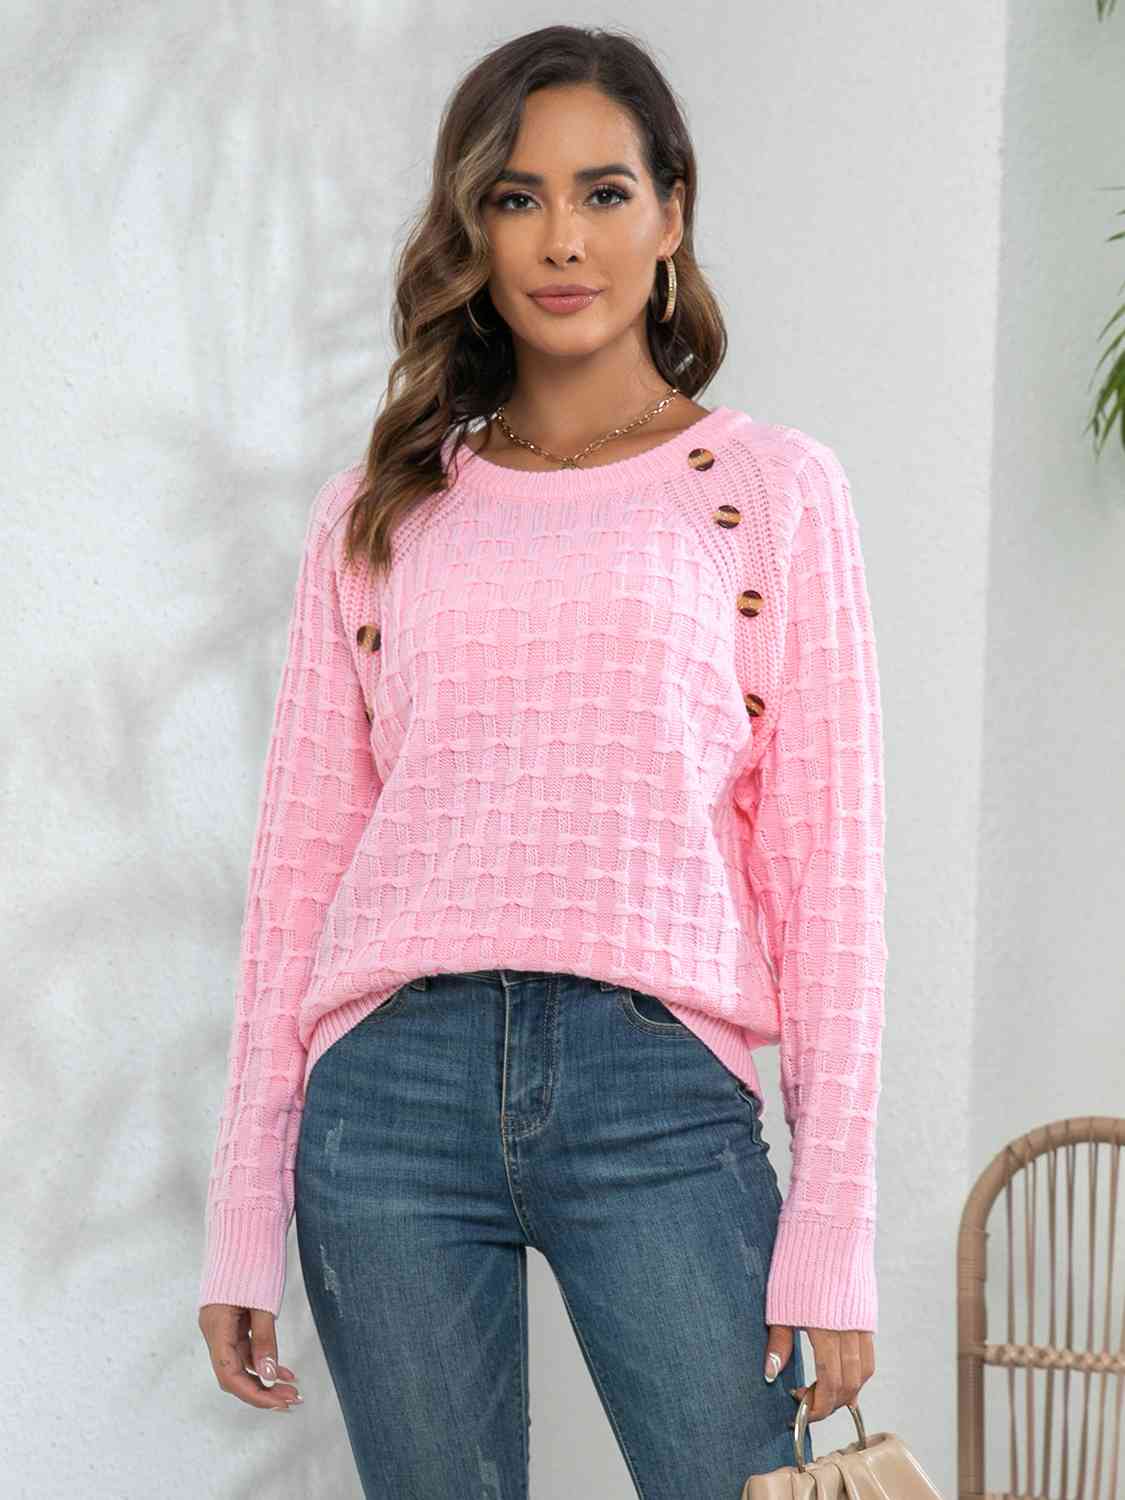 Decorative Button Long Sleeve Sweater (2 Colors)  Krazy Heart Designs Boutique Carnation Pink S 